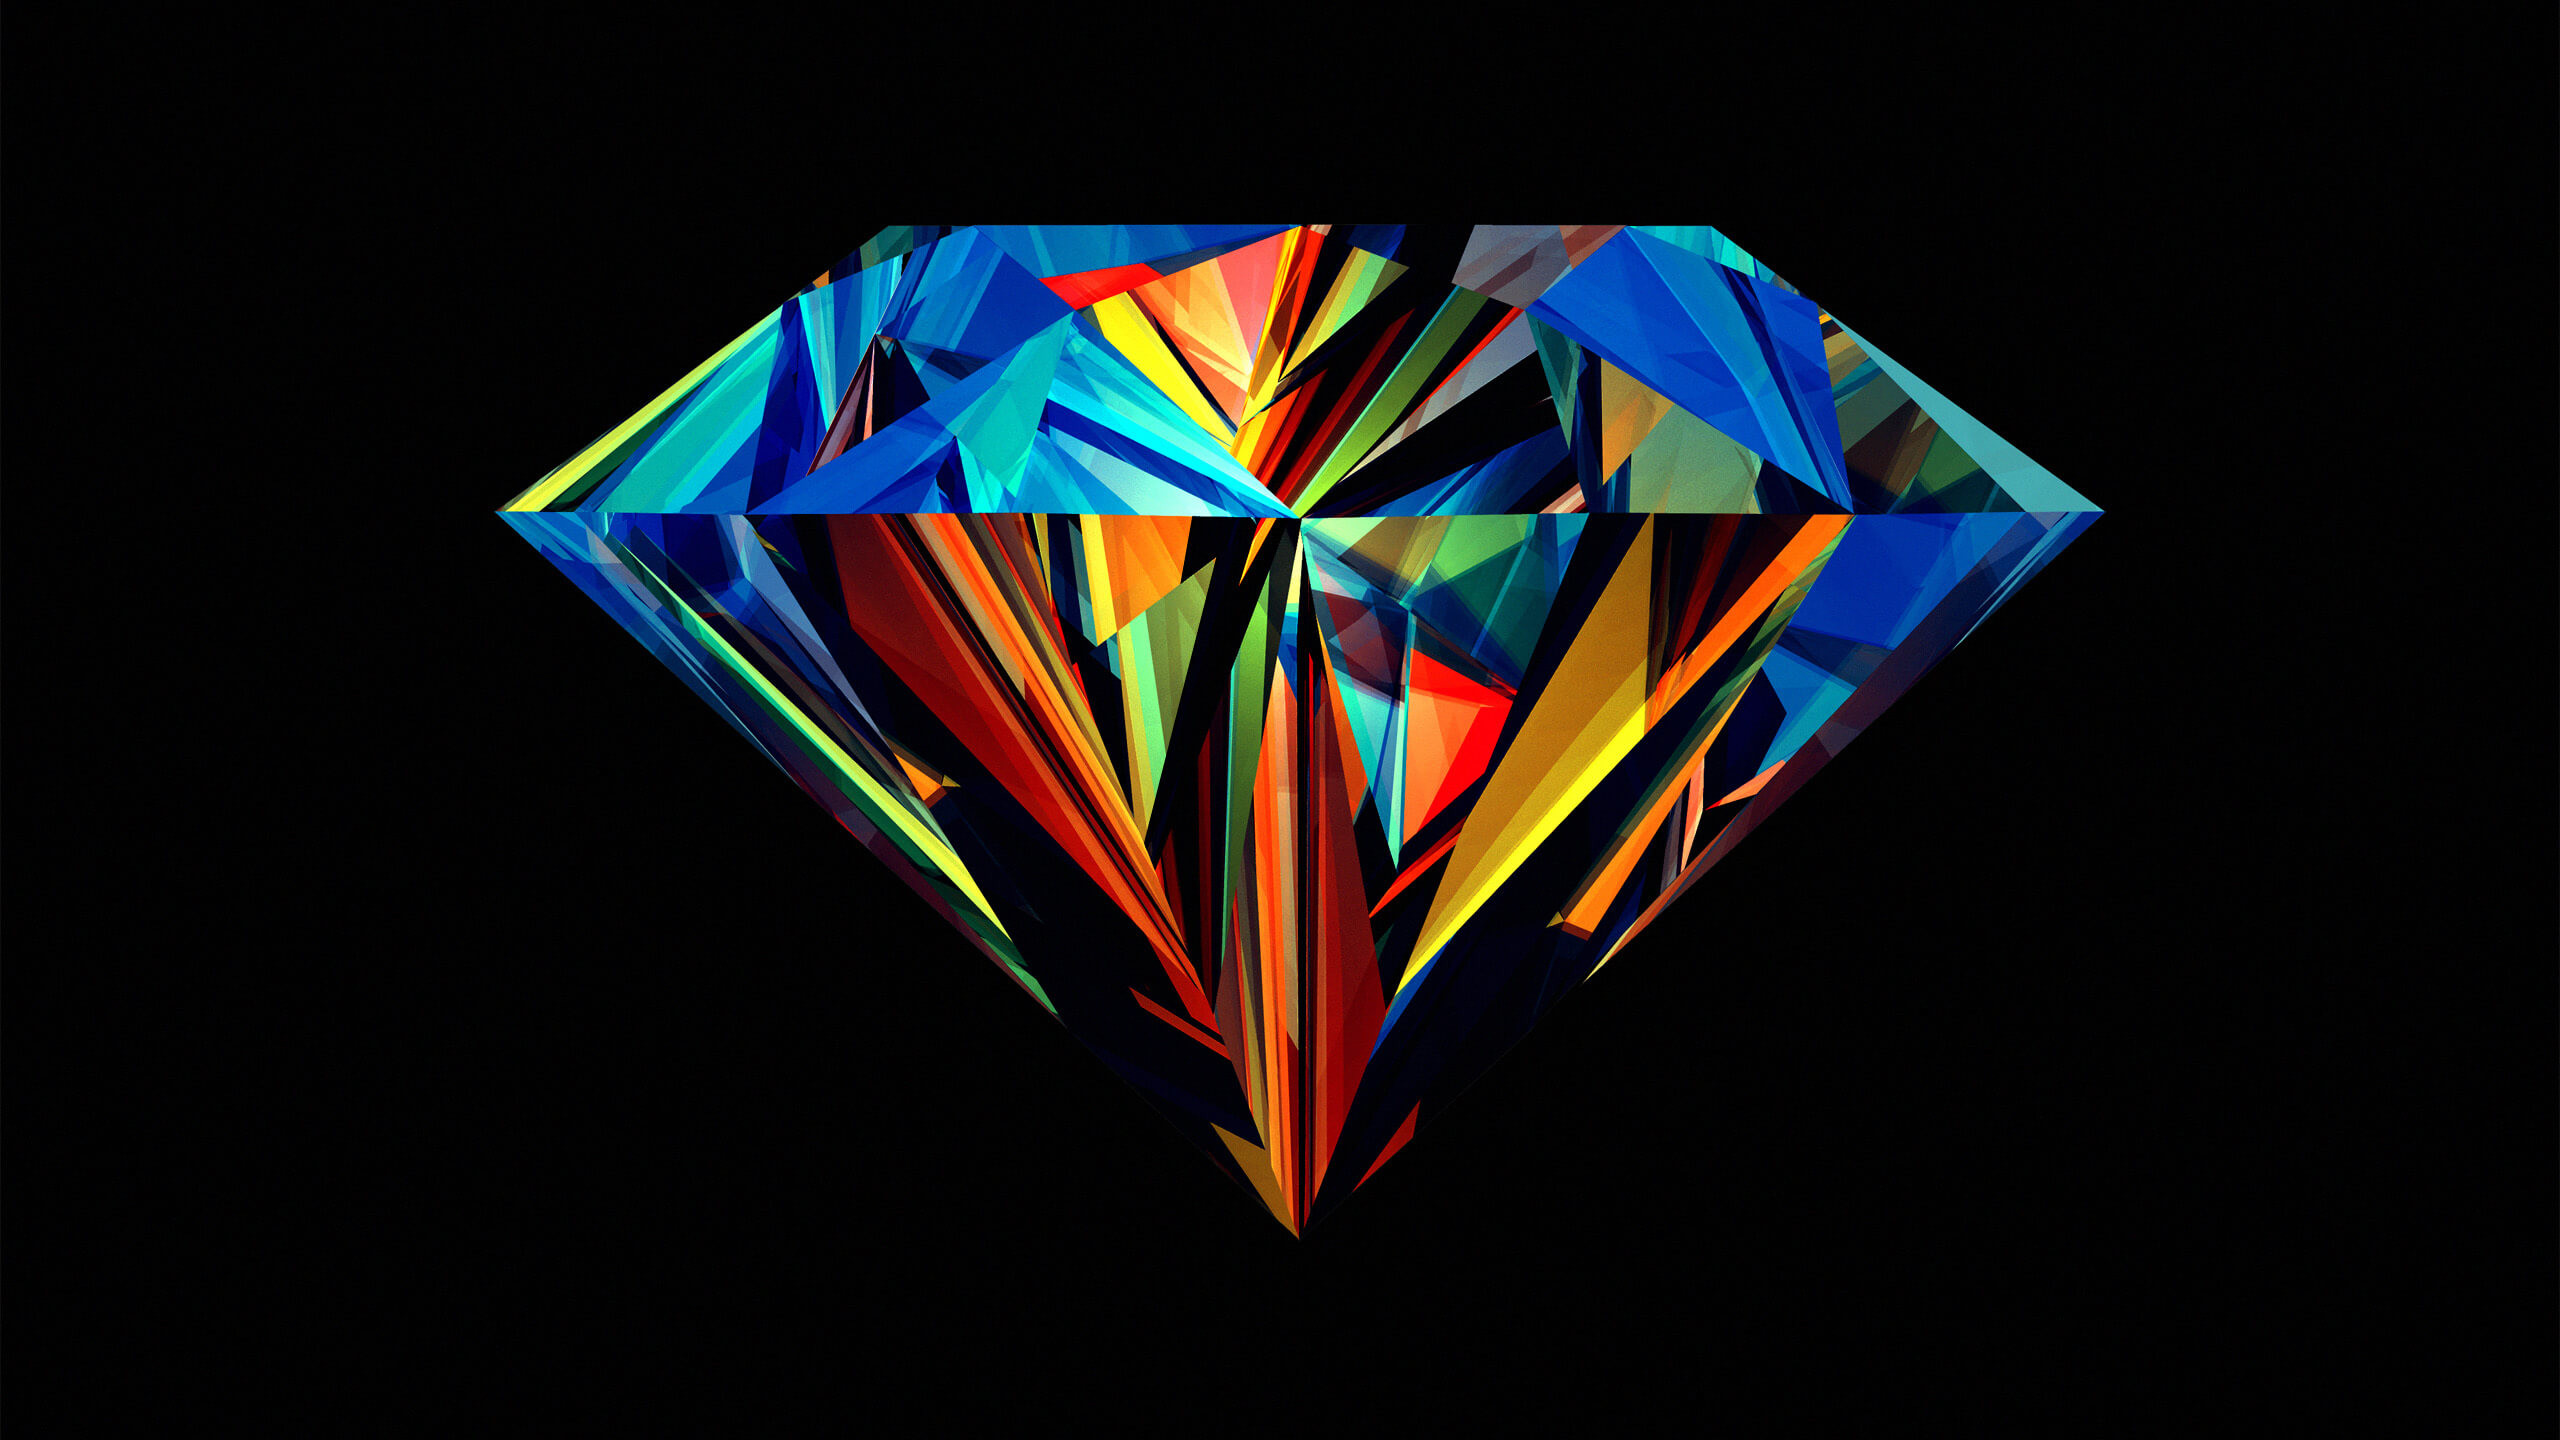 2560x1440 Colorful Diamond HD wallpaper for Youtube Channel Art - HDwallpapers .